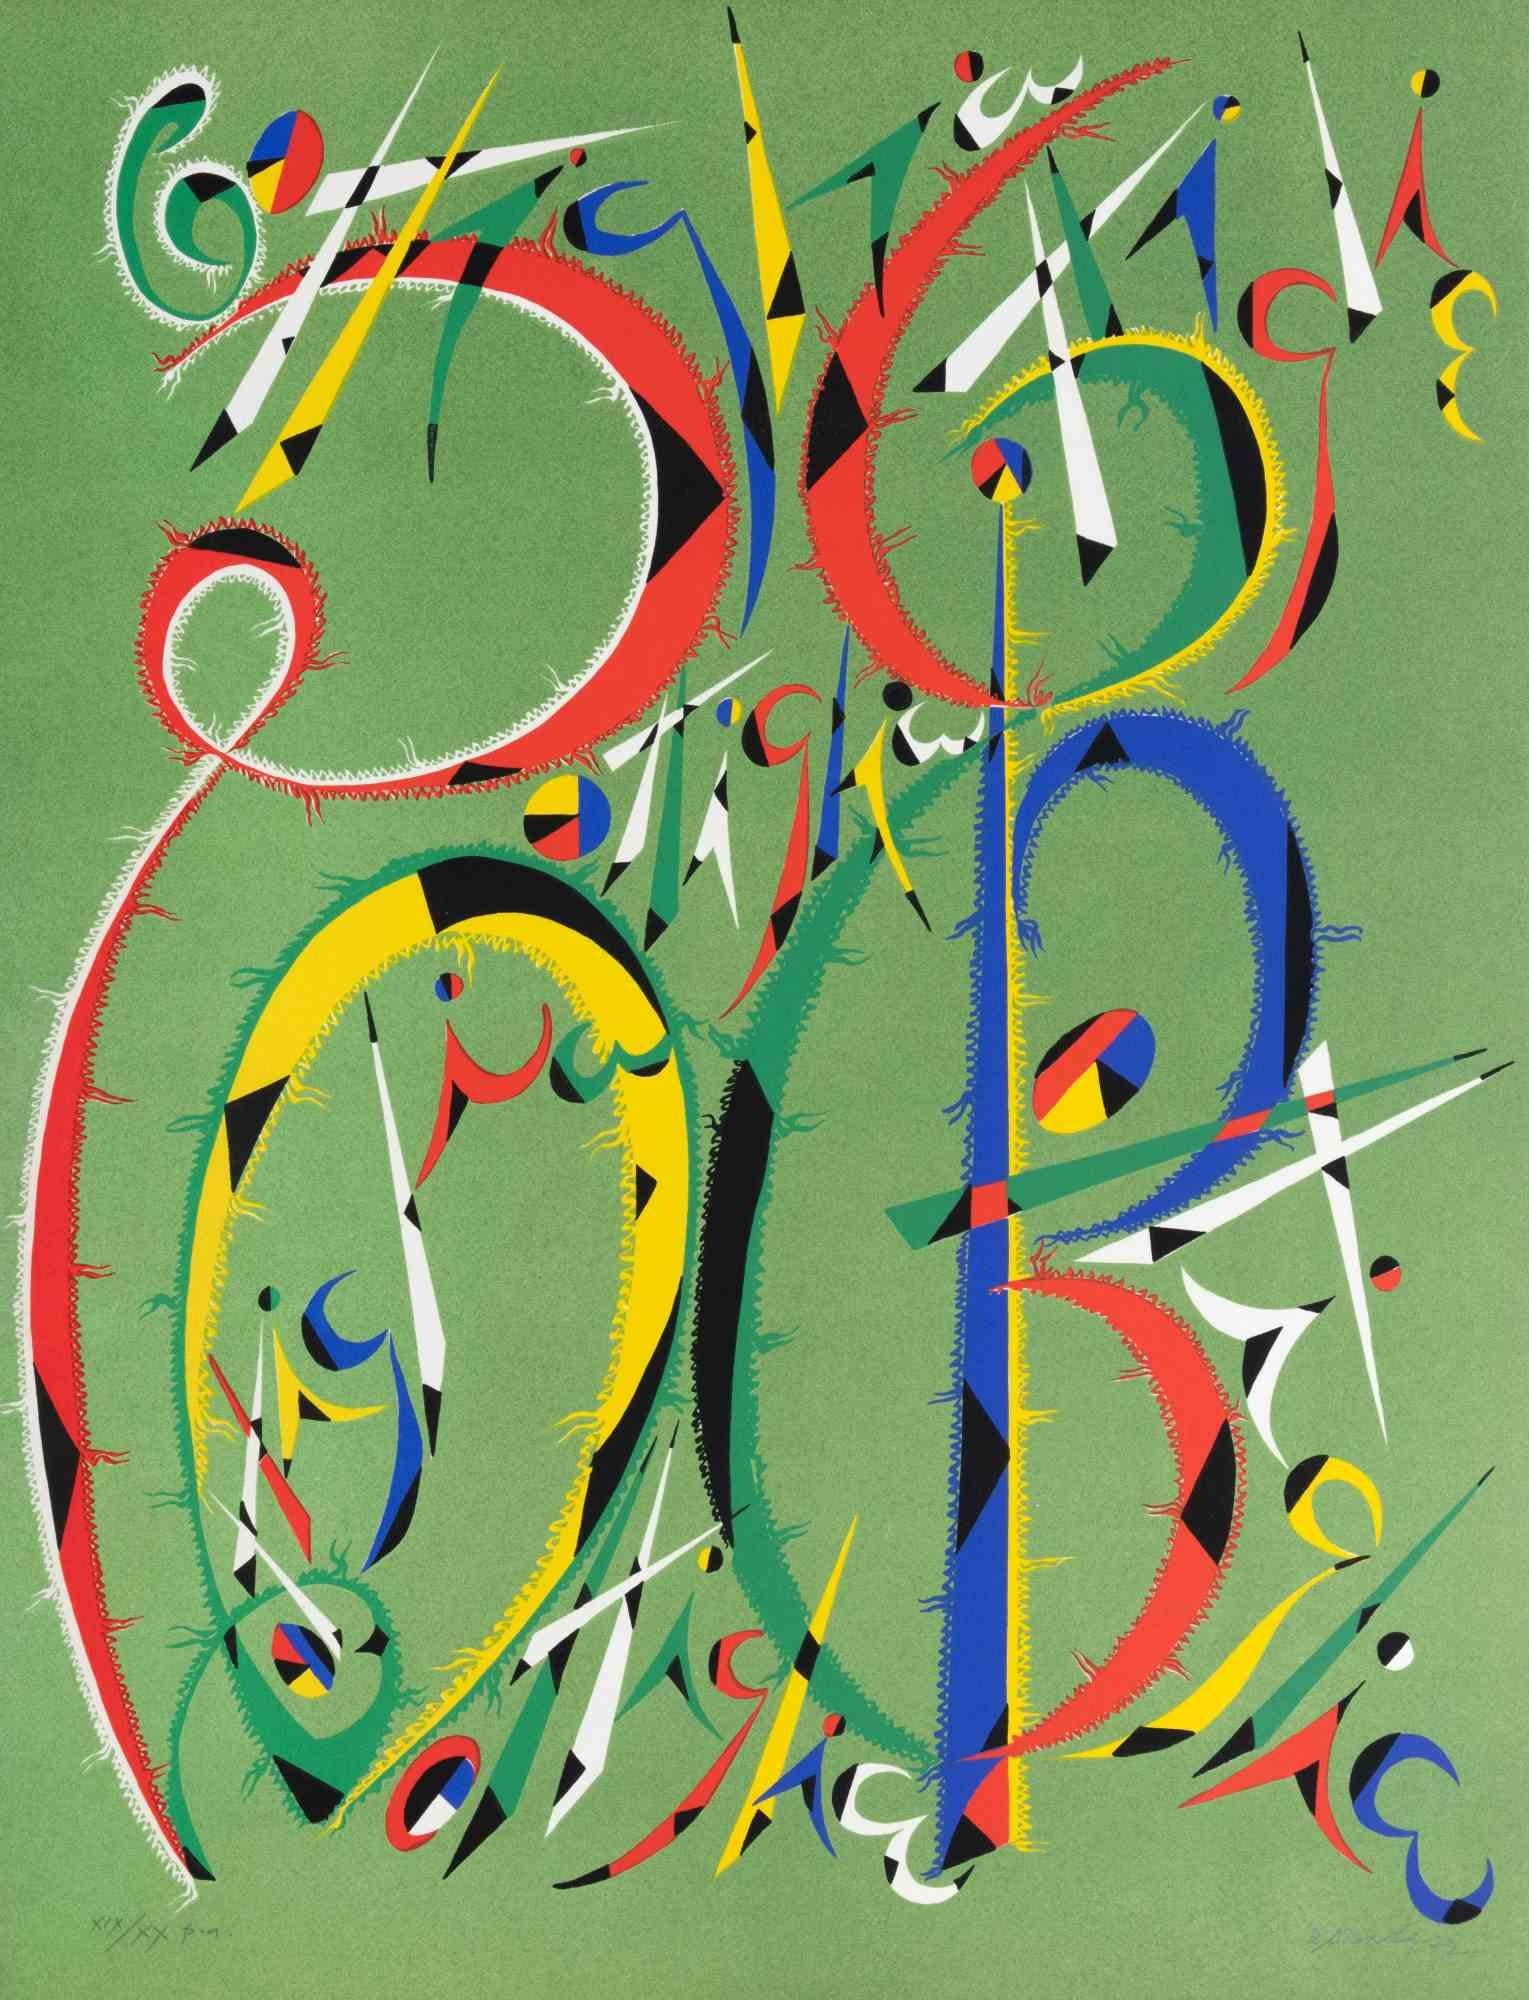 Letter B by Rafael Alberti, from Alphabet series,  is a lithograph, realized by Rafael Alberti in 1972.

Hand signed and dated on the lower right margin. Numbered on the lower left.

Editioon of XIX/XX. 

The artwork represents the letter B, with a